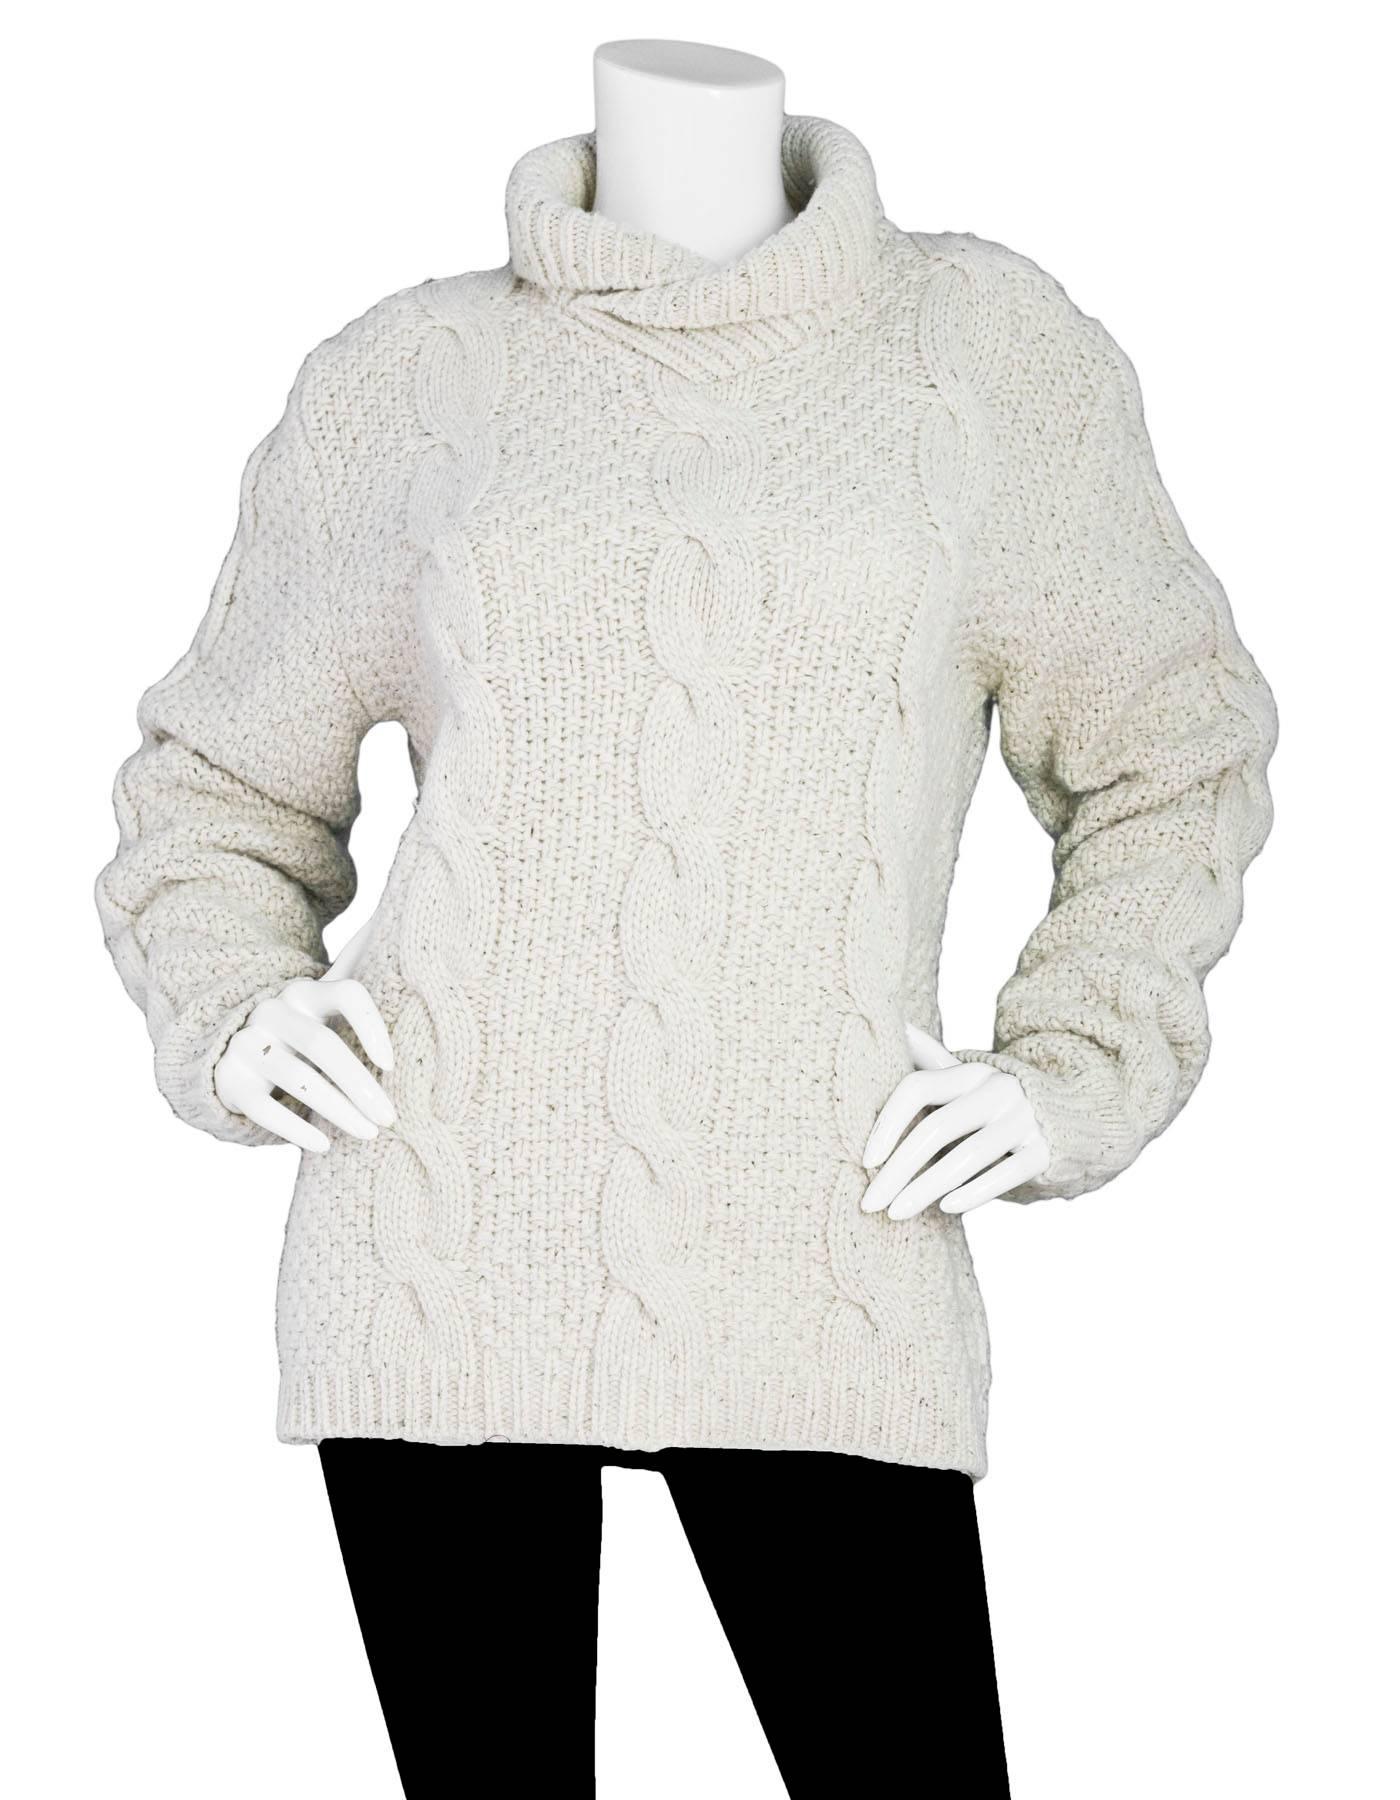 Burberry Cream Wool Cable-Knit Sweater Sz M

Made In: Italy
Color: Cream
Composition: 100% wool
Lining: None
Closure/Opening: Pull over
Overall Condition: Excellent pre-owned condition, light pilling
Marked Size: M
Bust: 40